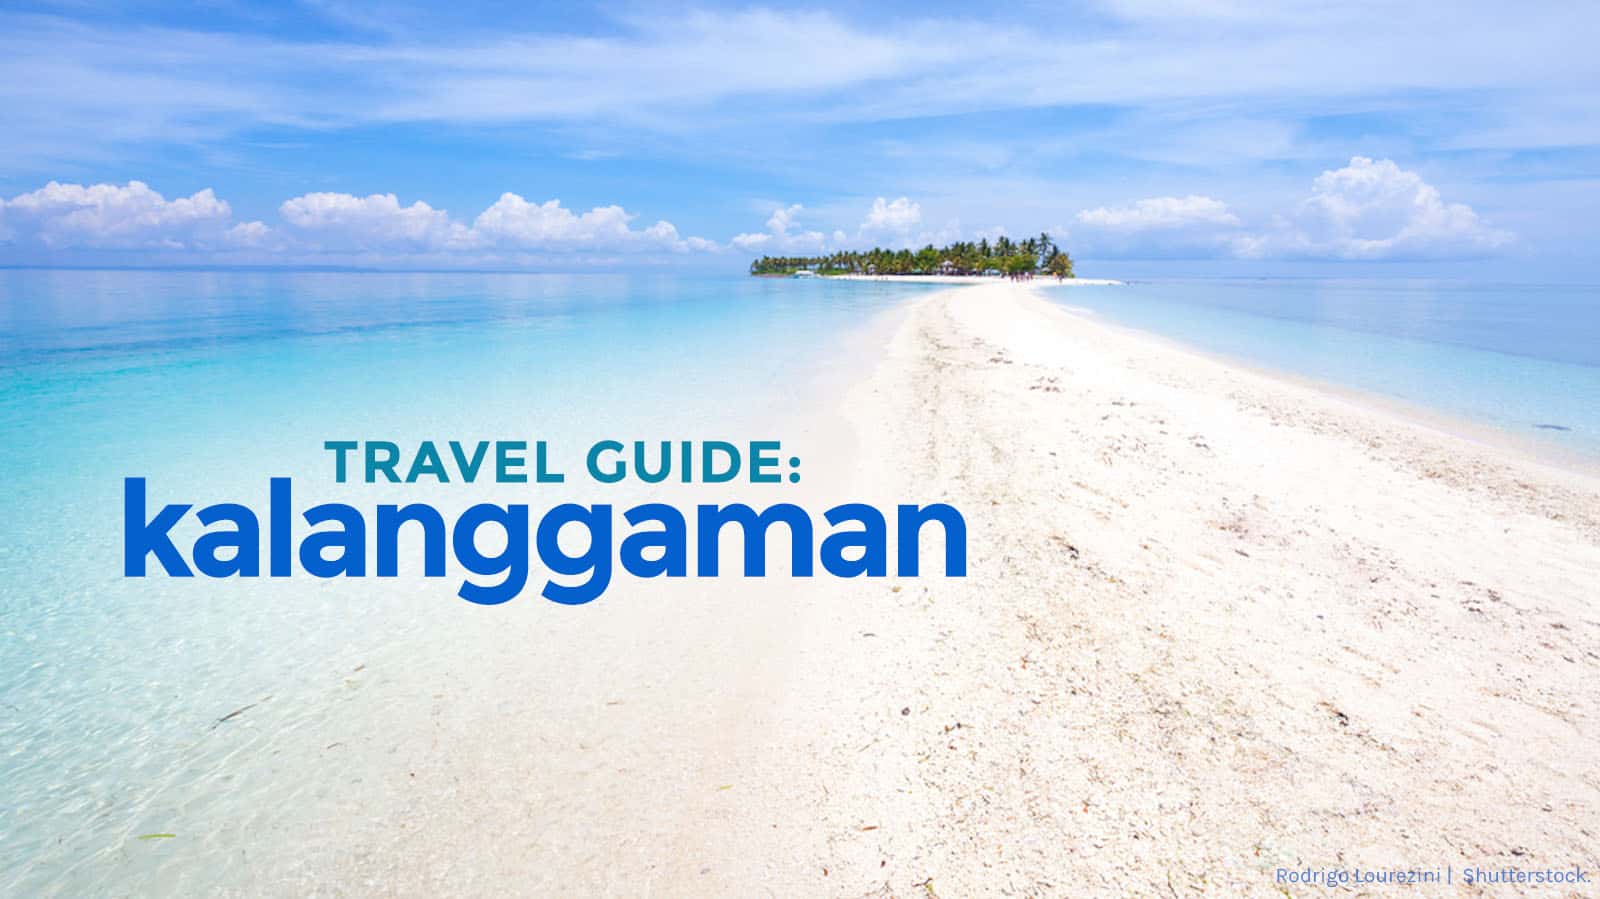 KALANGGAMAN ISLAND Travel Guide & Itinerary: How to Get There